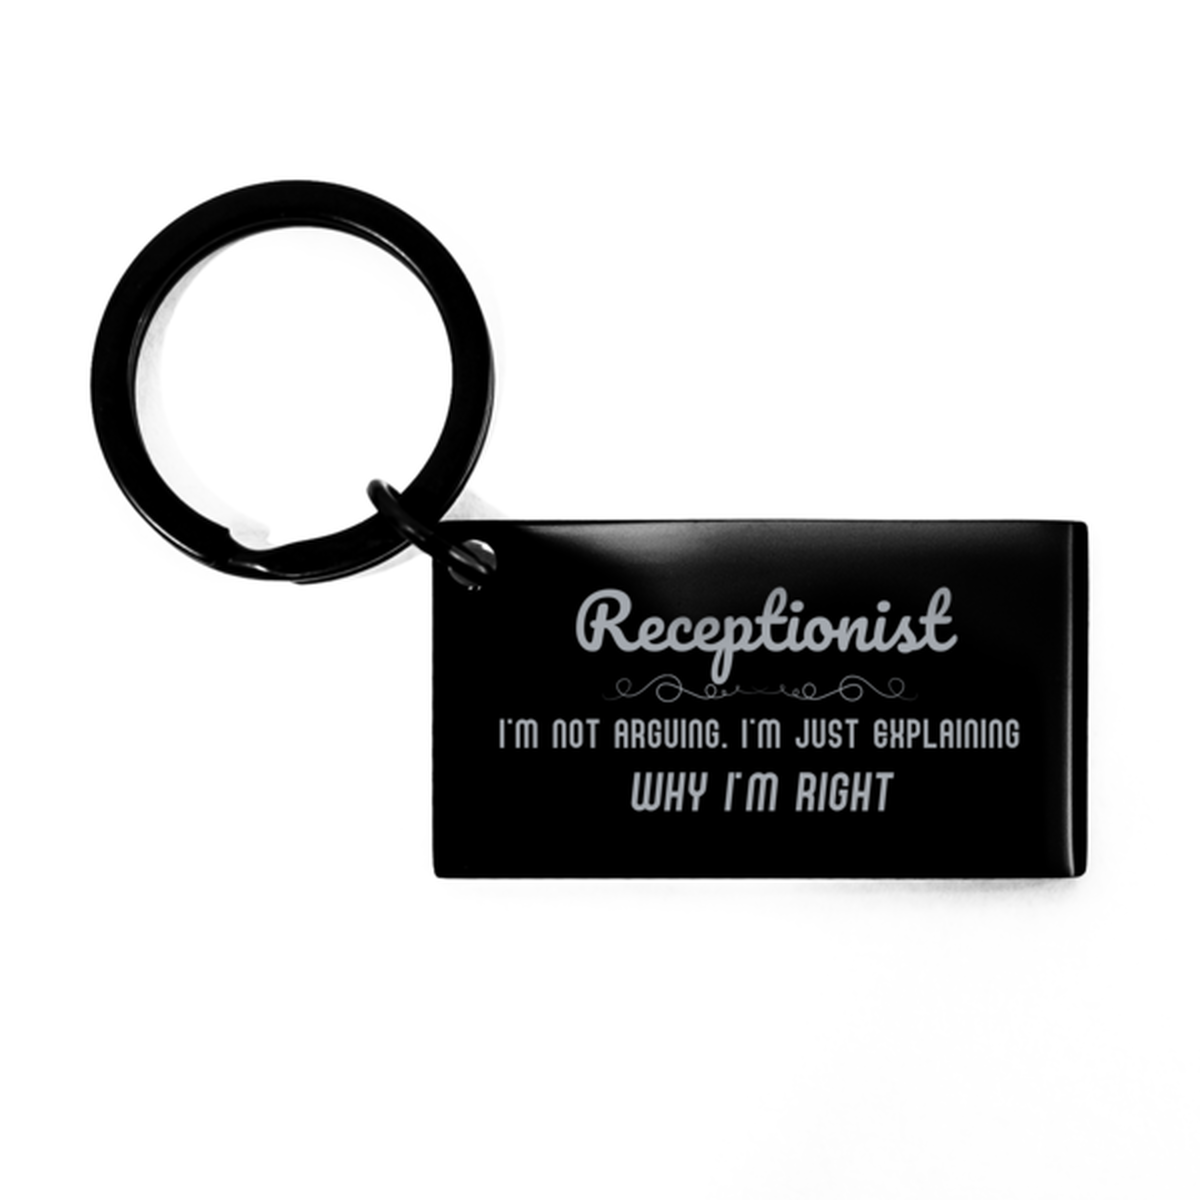 Receptionist I'm not Arguing. I'm Just Explaining Why I'm RIGHT Keychain, Funny Saying Quote Receptionist Gifts For Receptionist Graduation Birthday Christmas Gifts for Men Women Coworker